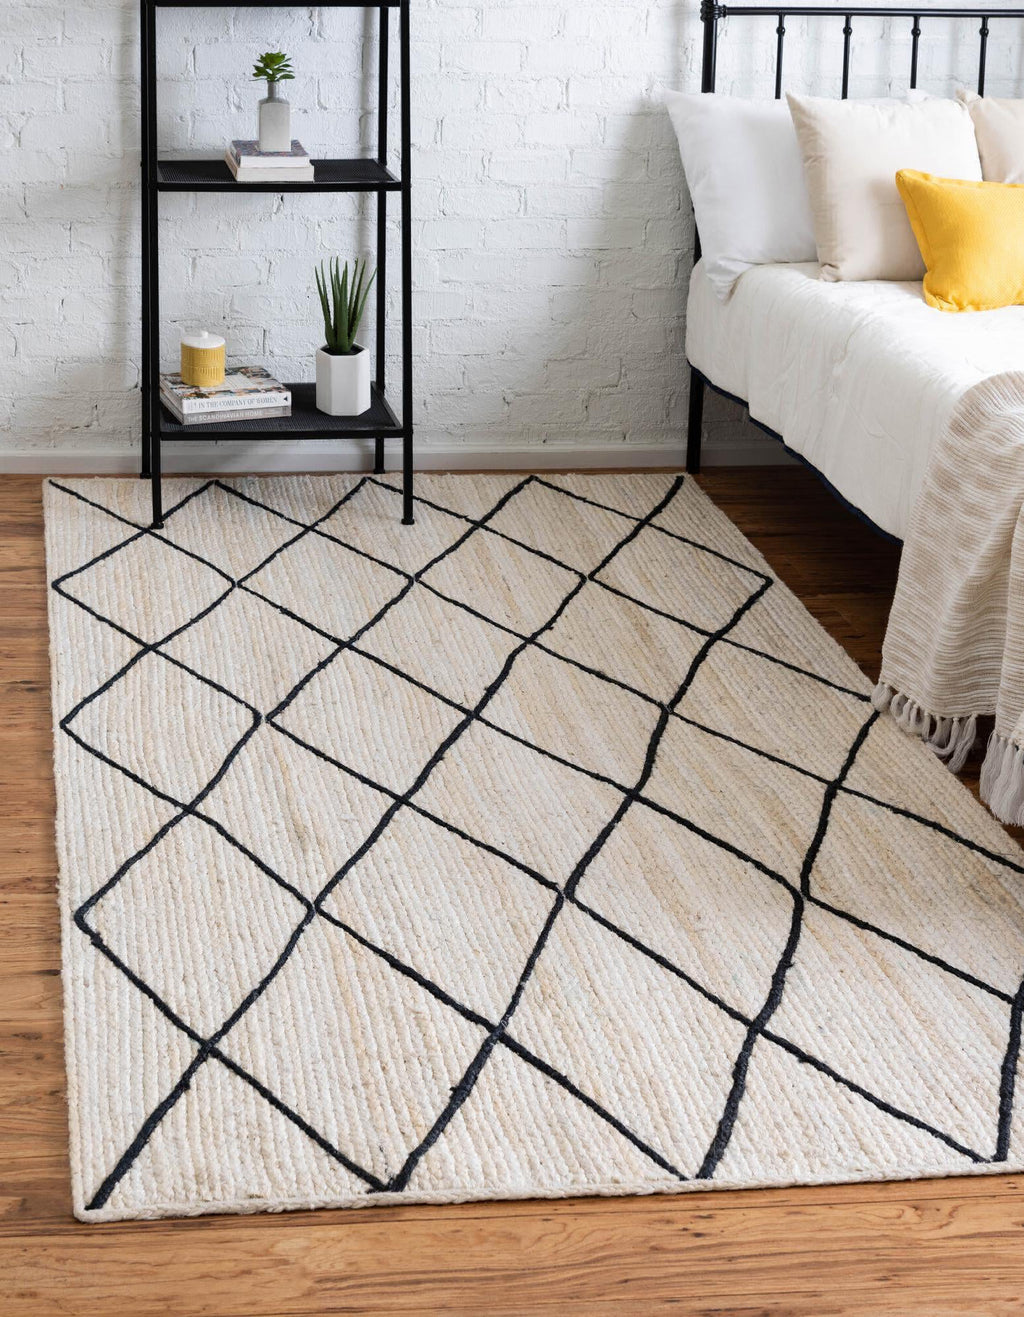 Unique Loom Braided Jute MGN-28 Ivory and Black Area Rug Rectangle Lifestyle Image Feature